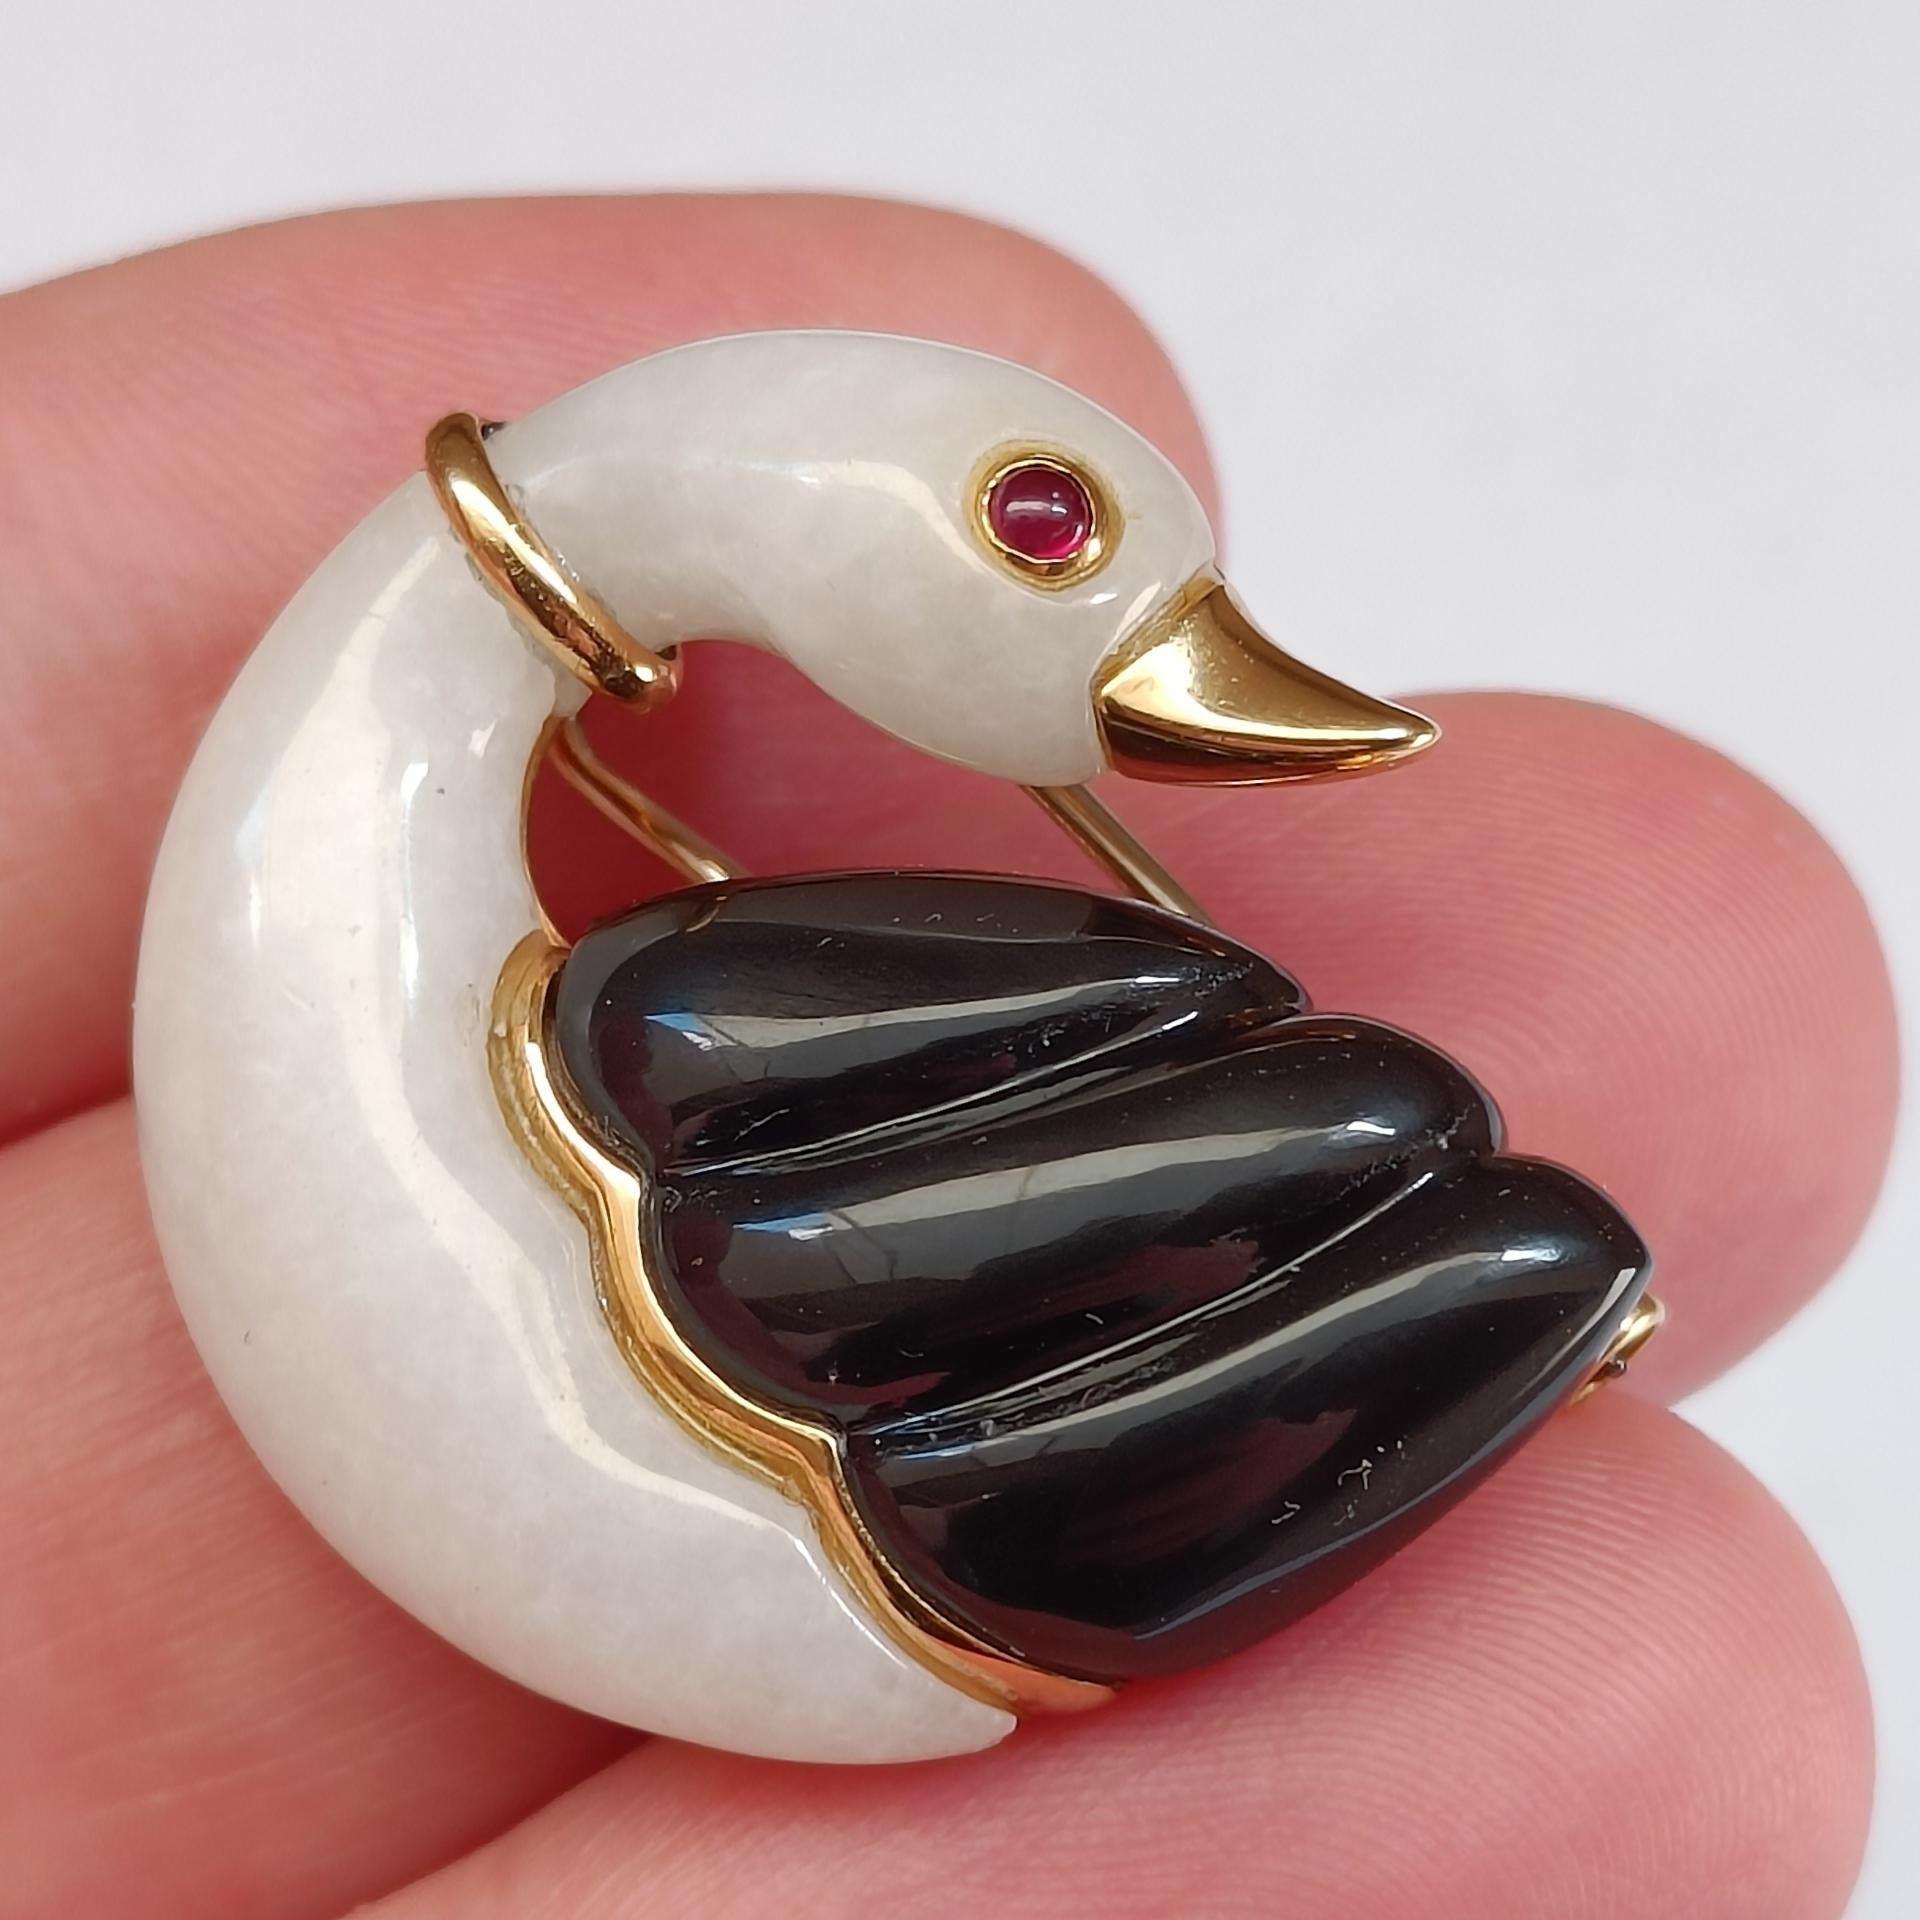 Cabochon 18k Gold Swan Brooch with Ruby, Chalcedony and Onyx - Vintage Animal Pin Brooch For Sale